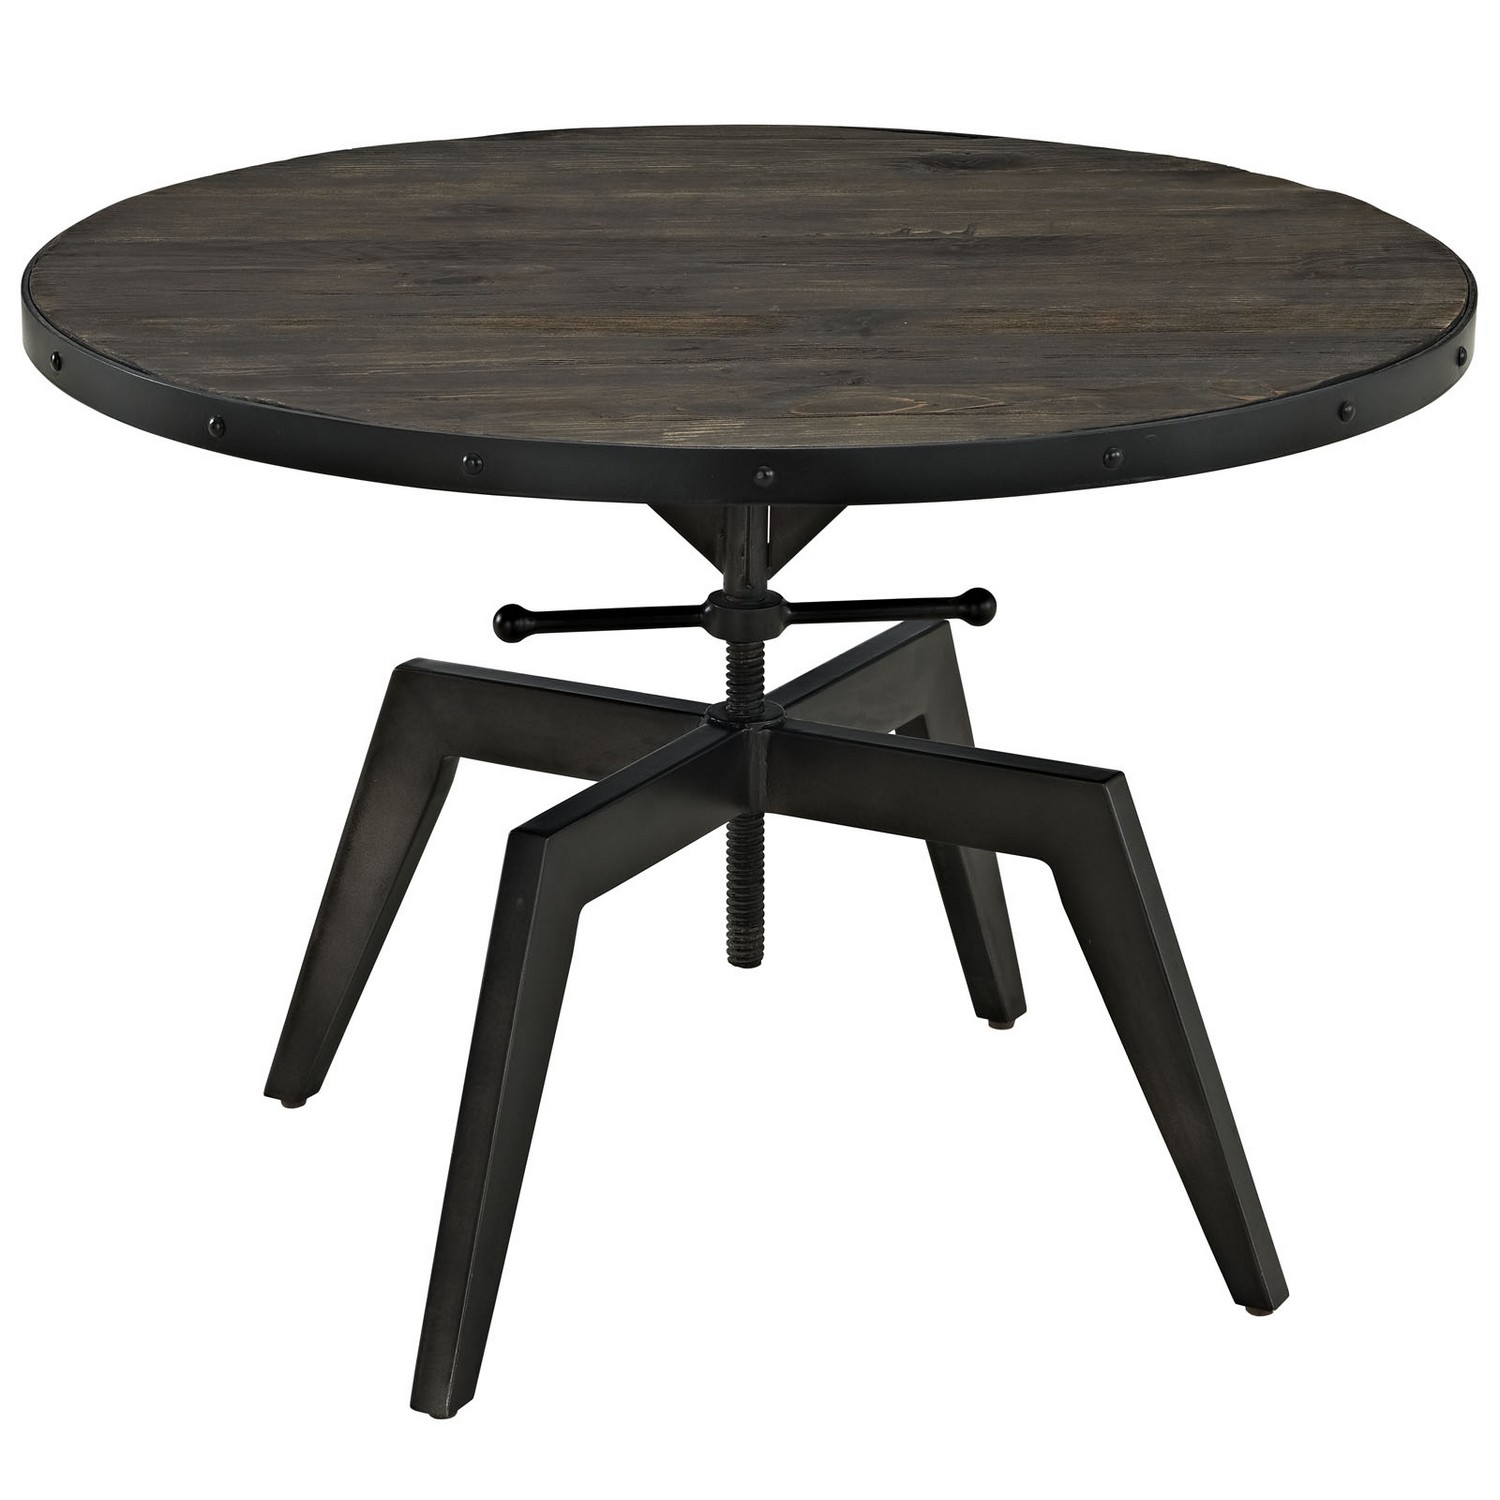 Modway Grasp Wood Top Coffee Table - Black